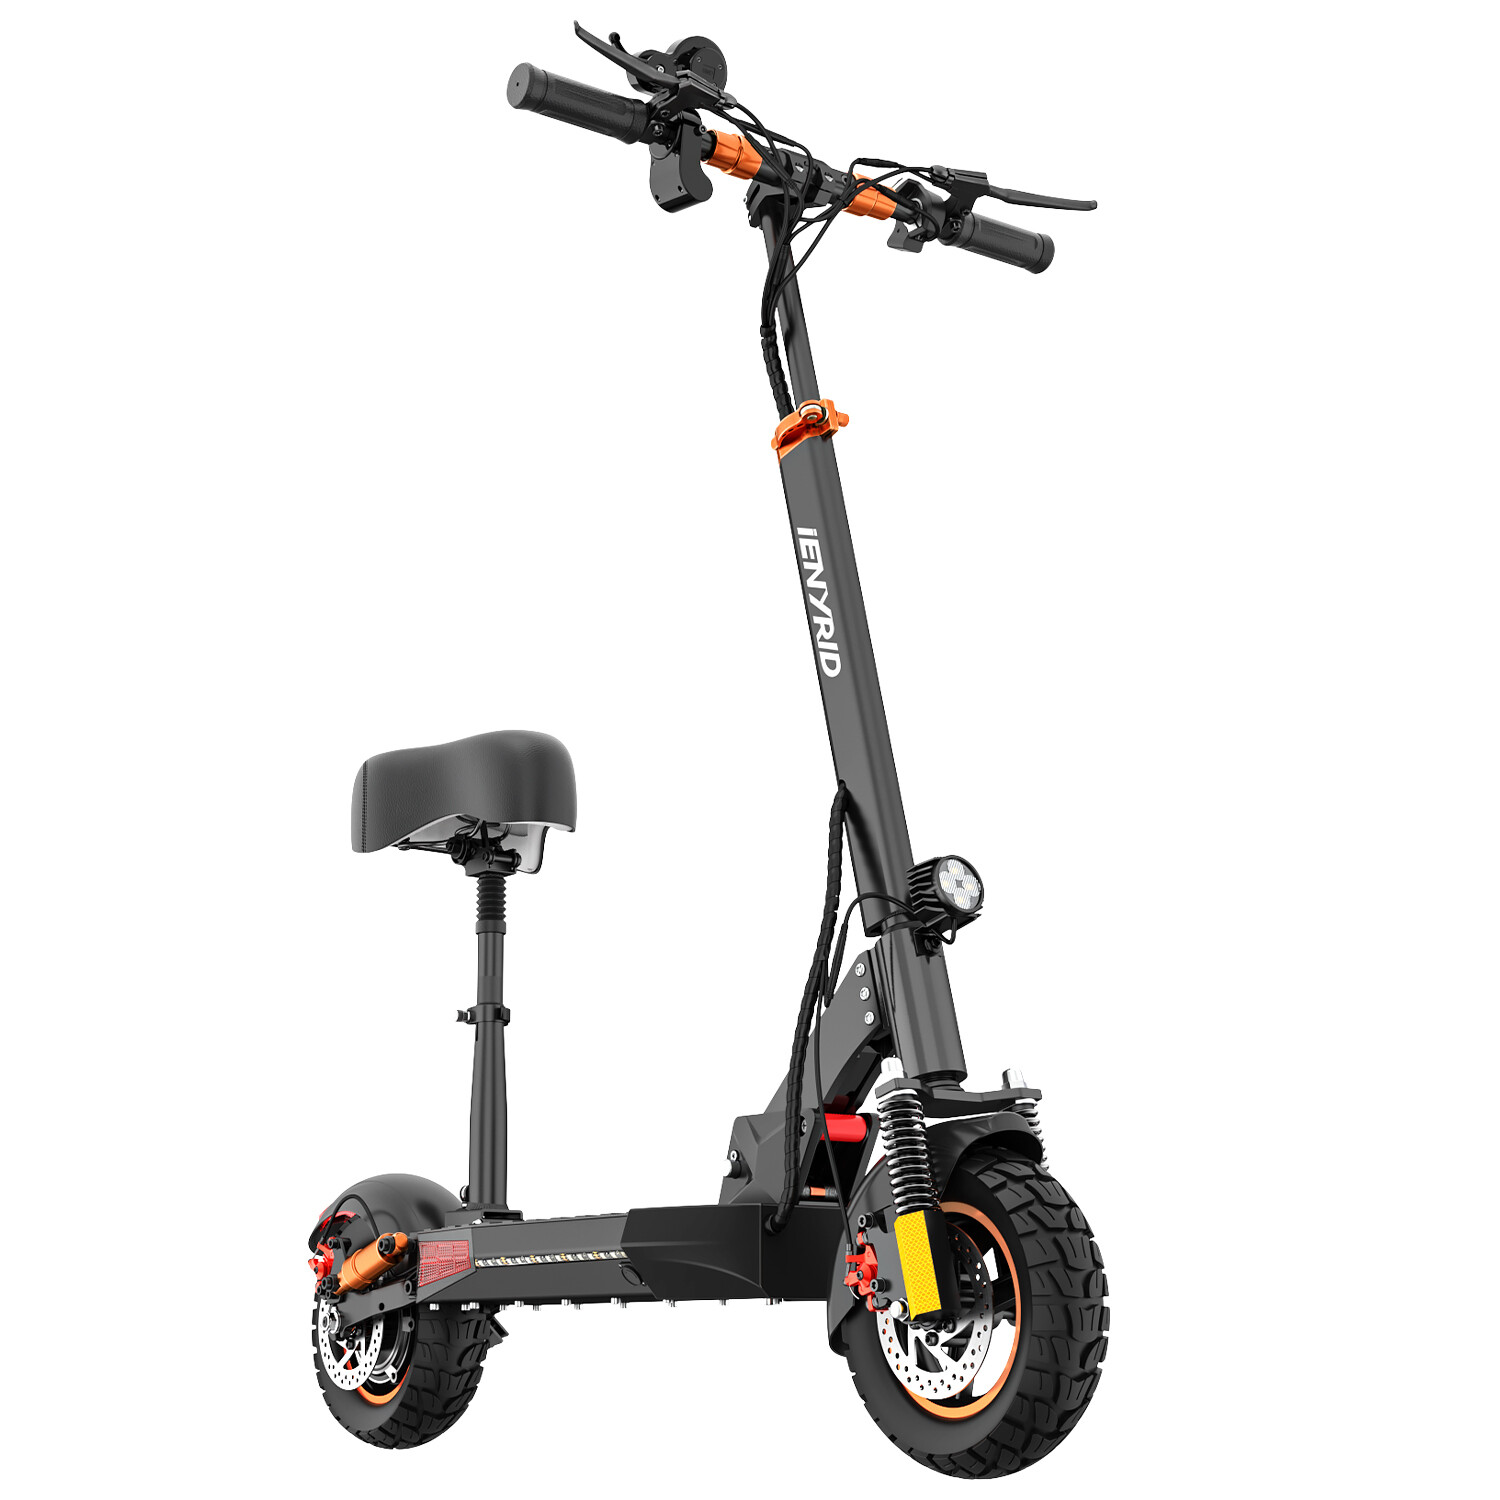 IENYRID M4 PRO S+ Electric Scooter with Seat Long Range Powerful 800W Motor